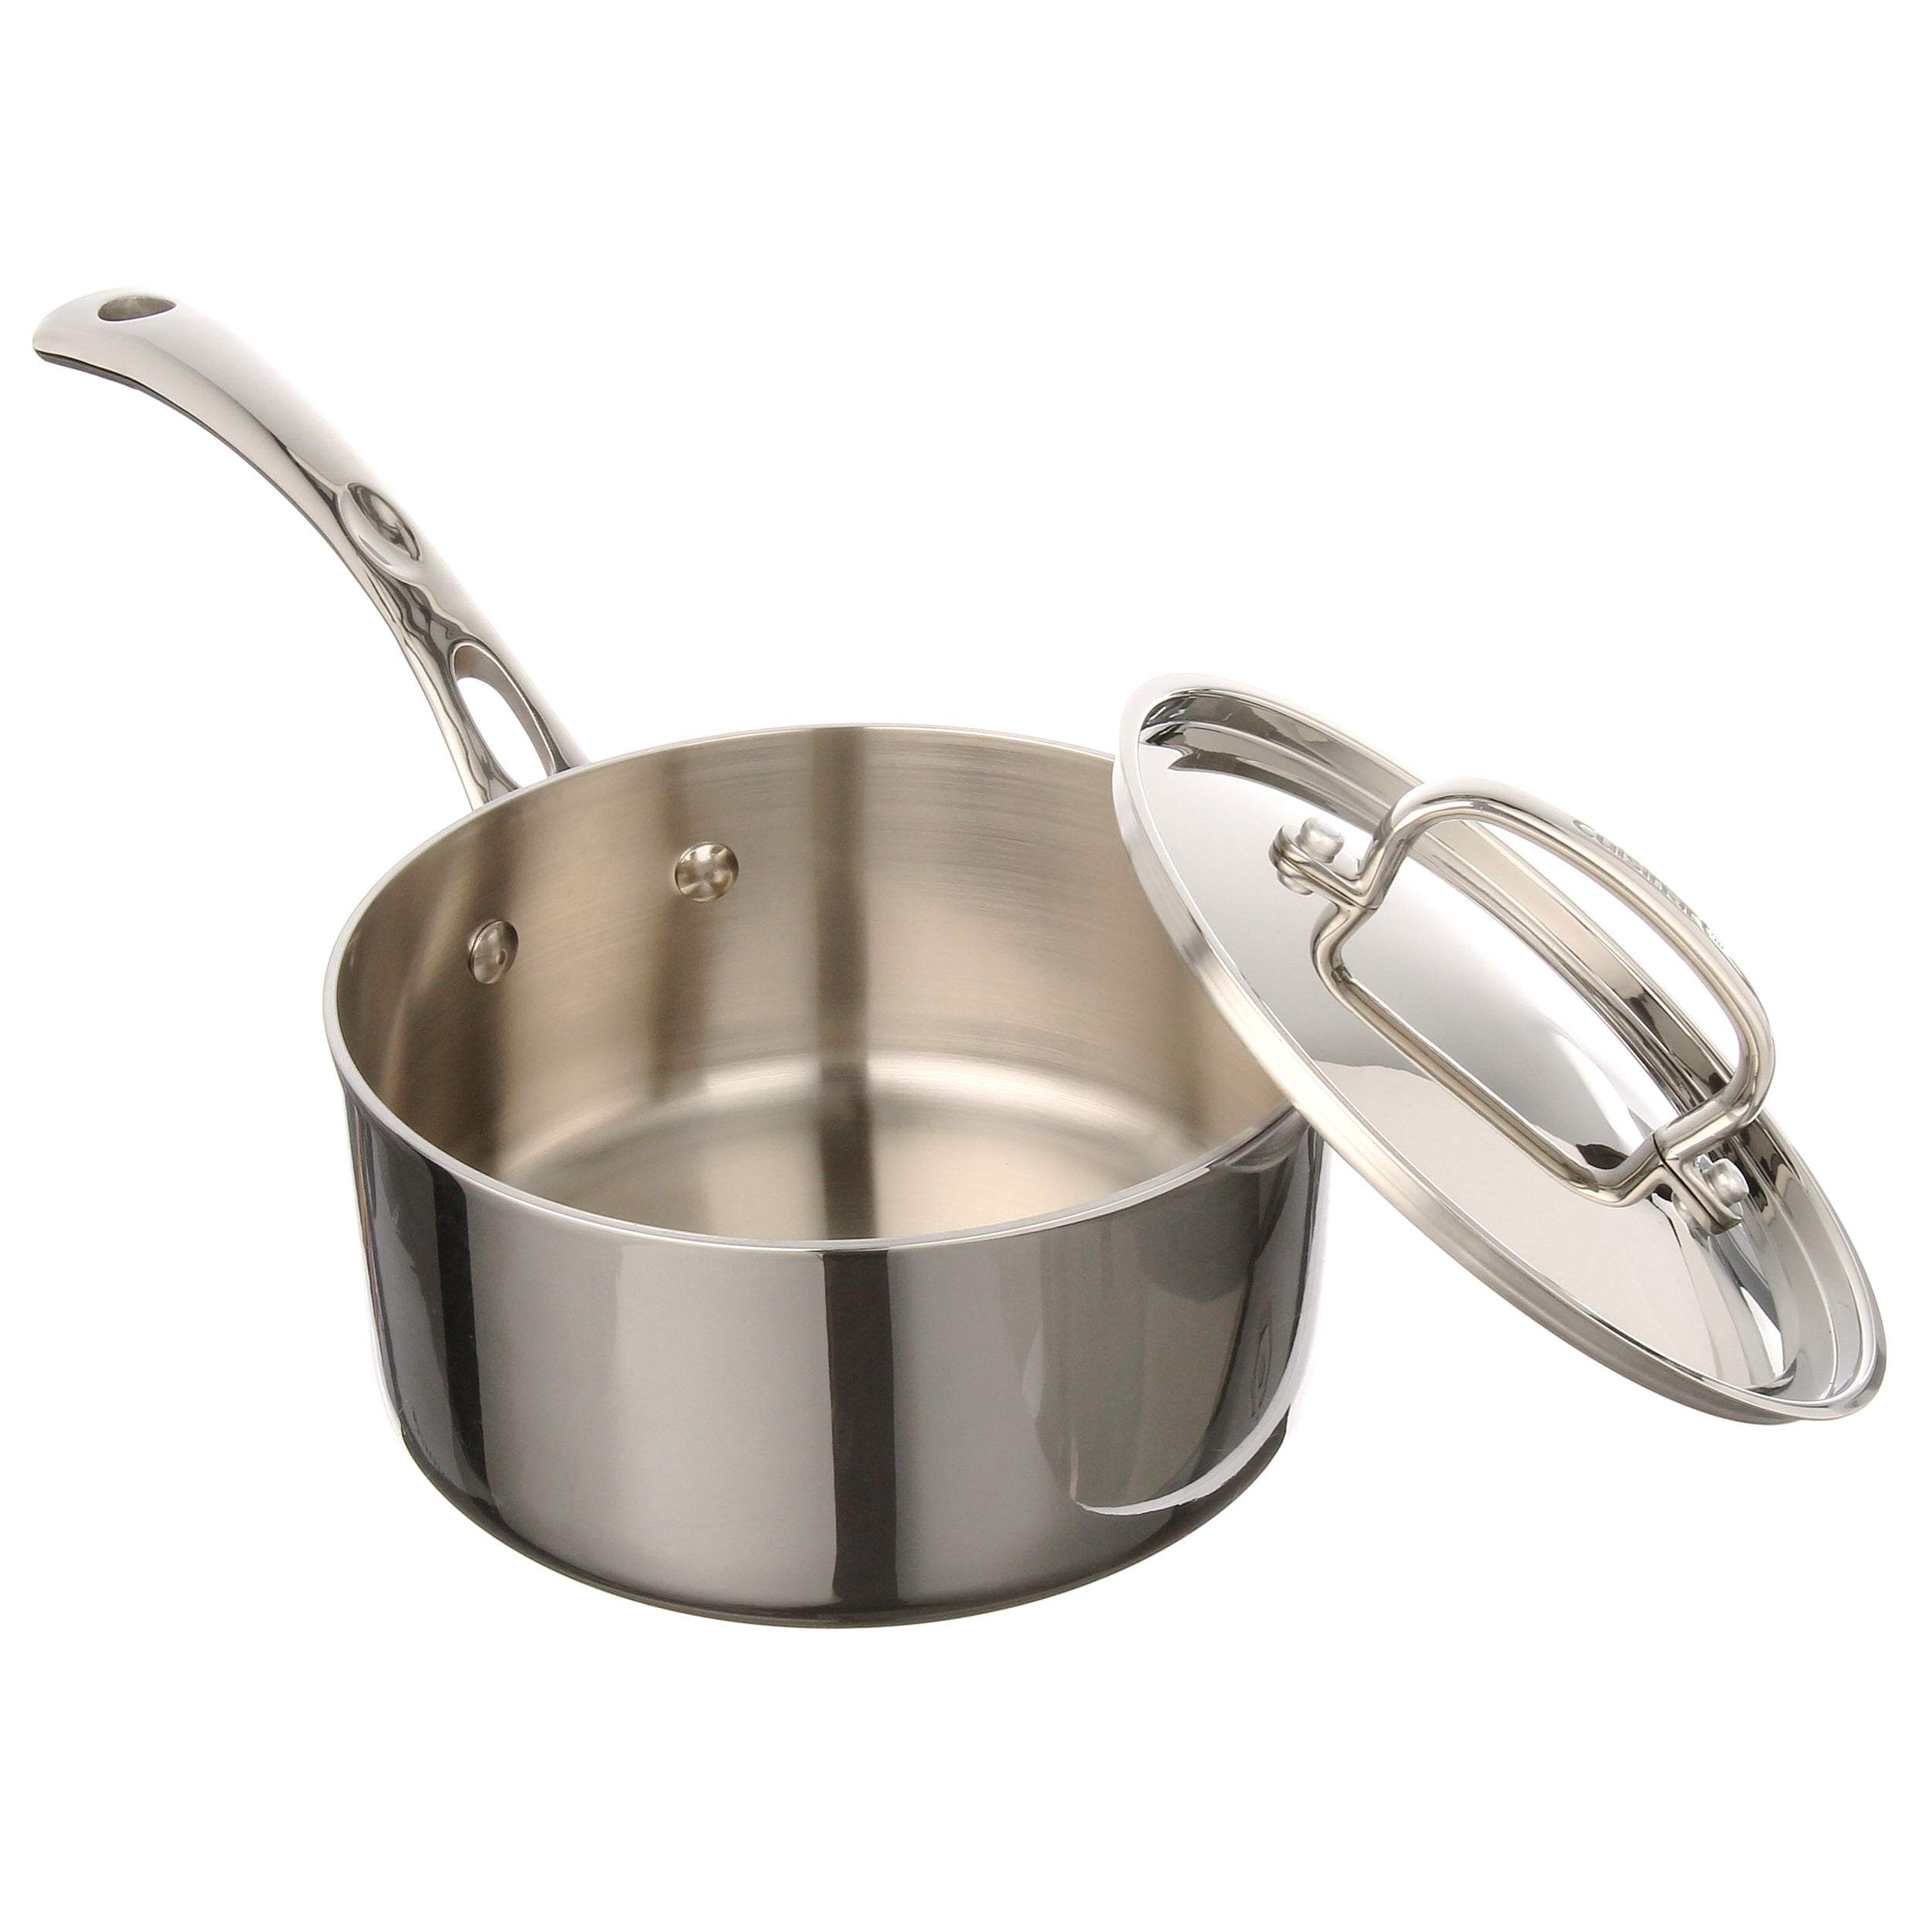 Cuisinart Chef's Classic Stainless 2-quart Saucepan with Cover - 7198848